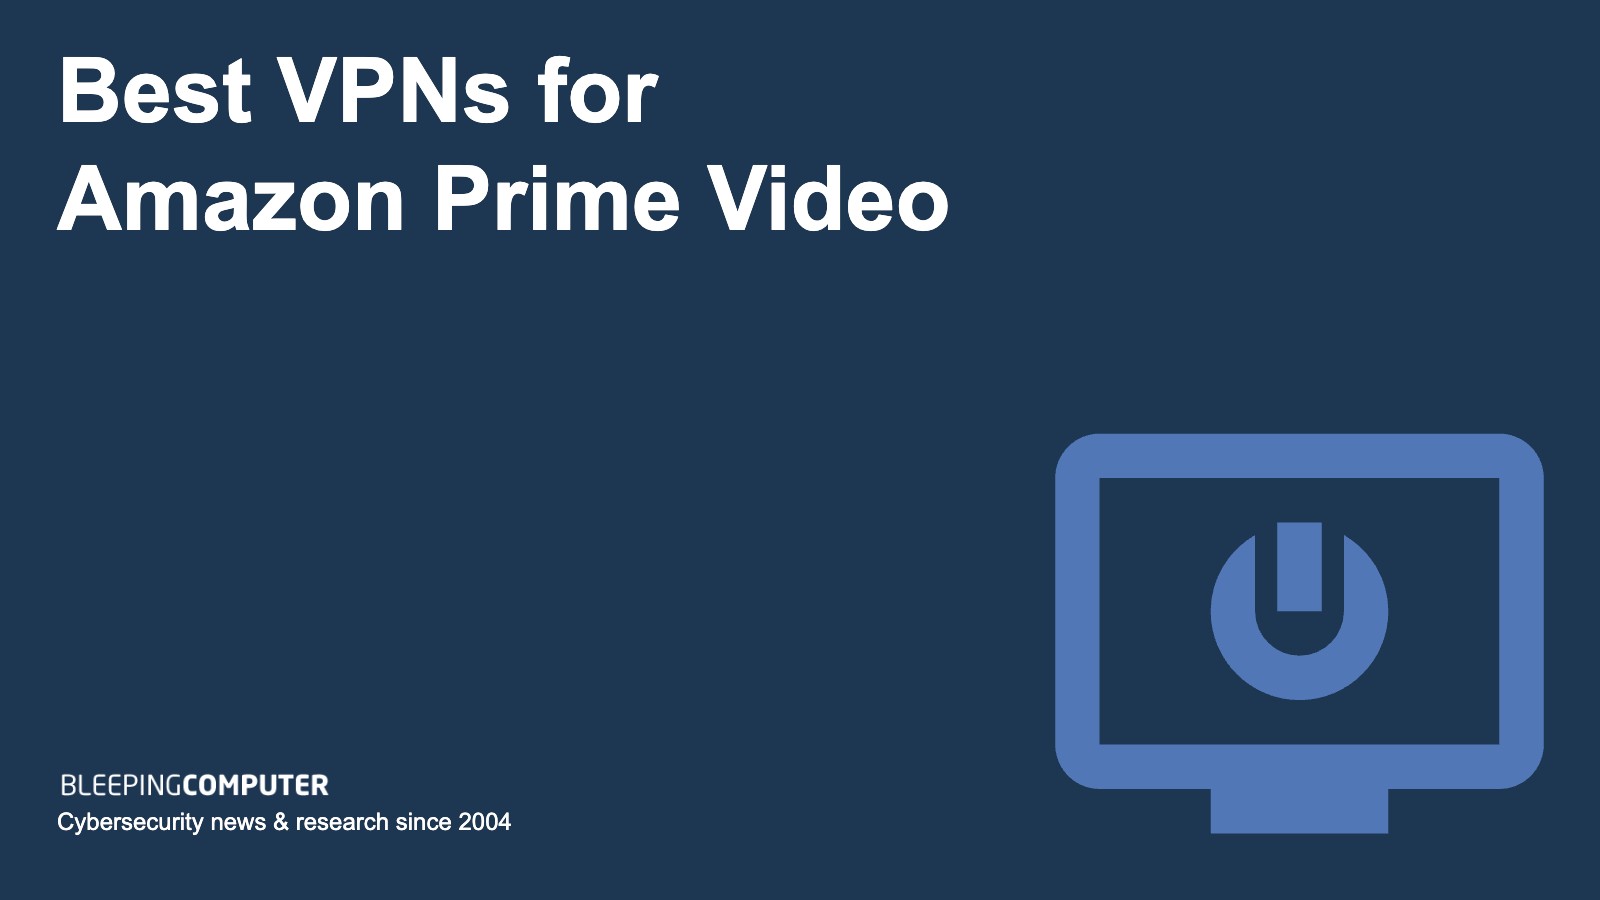 Best VPNs for watching Amazon Prime Video